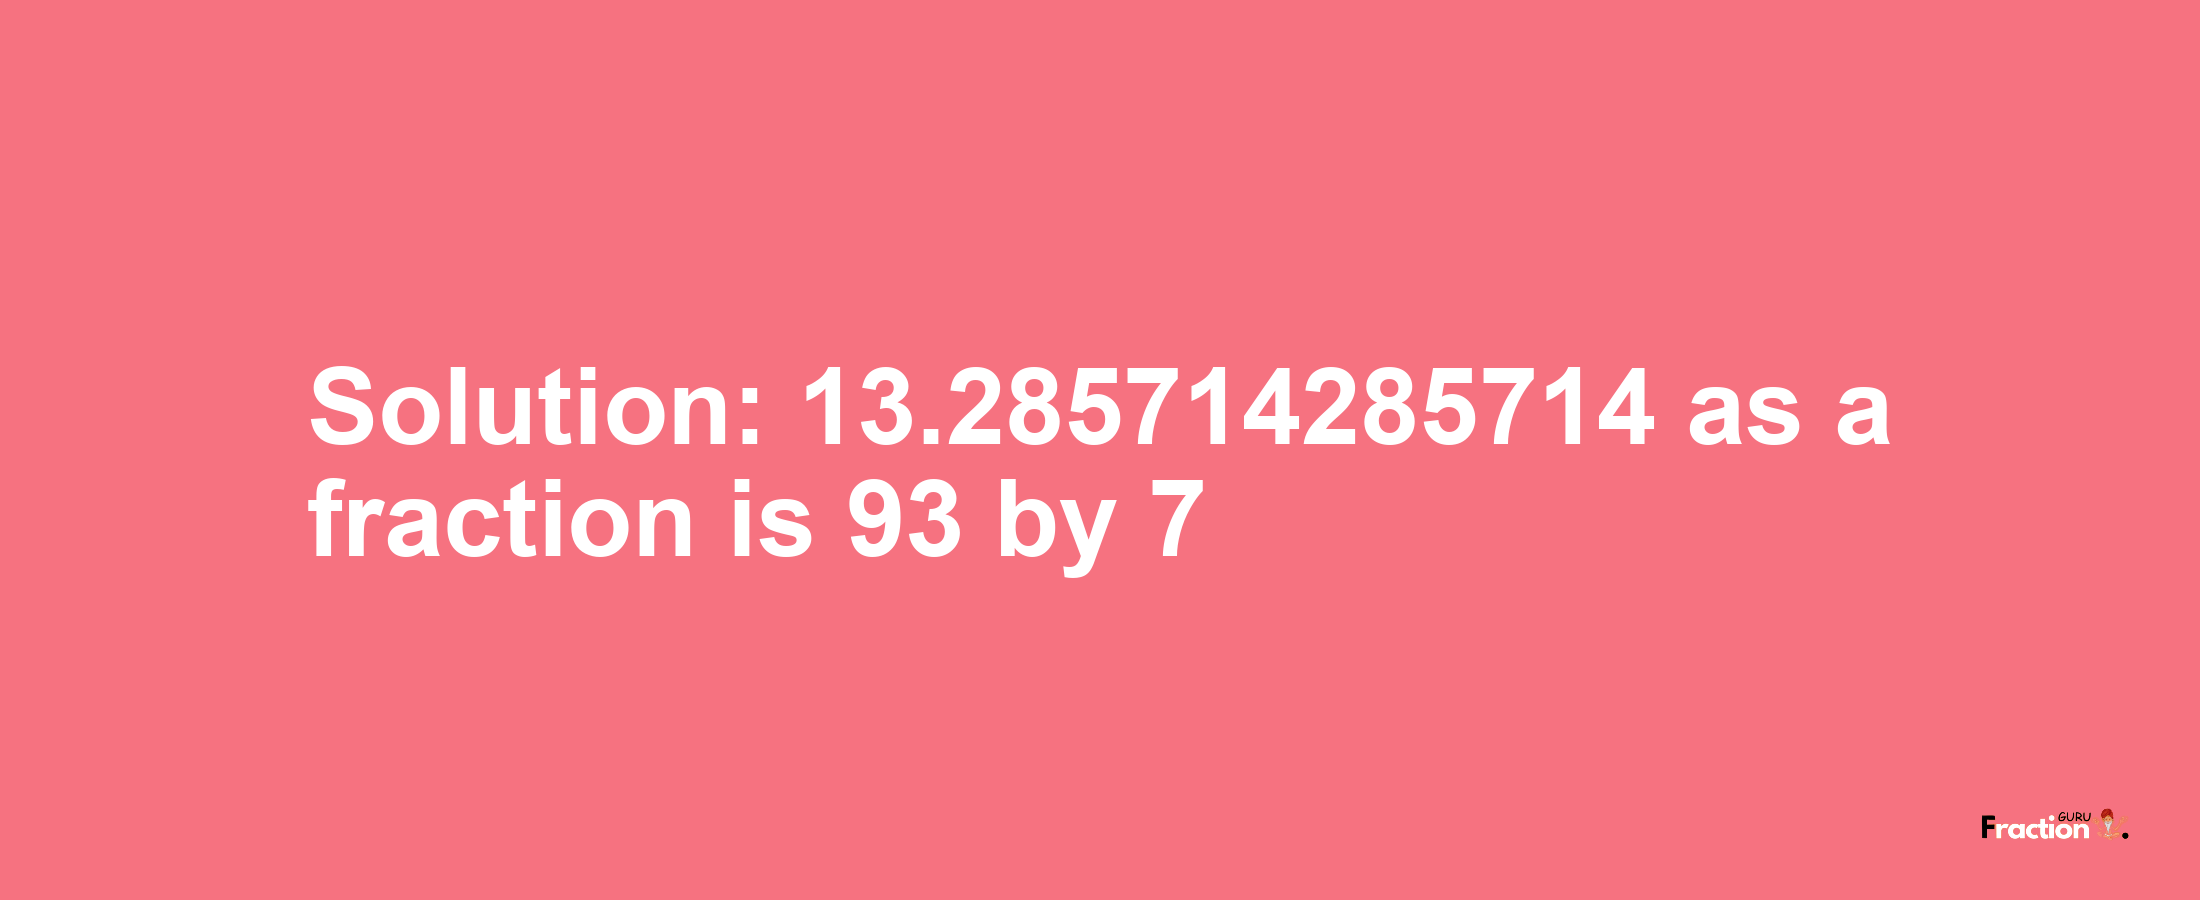 Solution:13.285714285714 as a fraction is 93/7